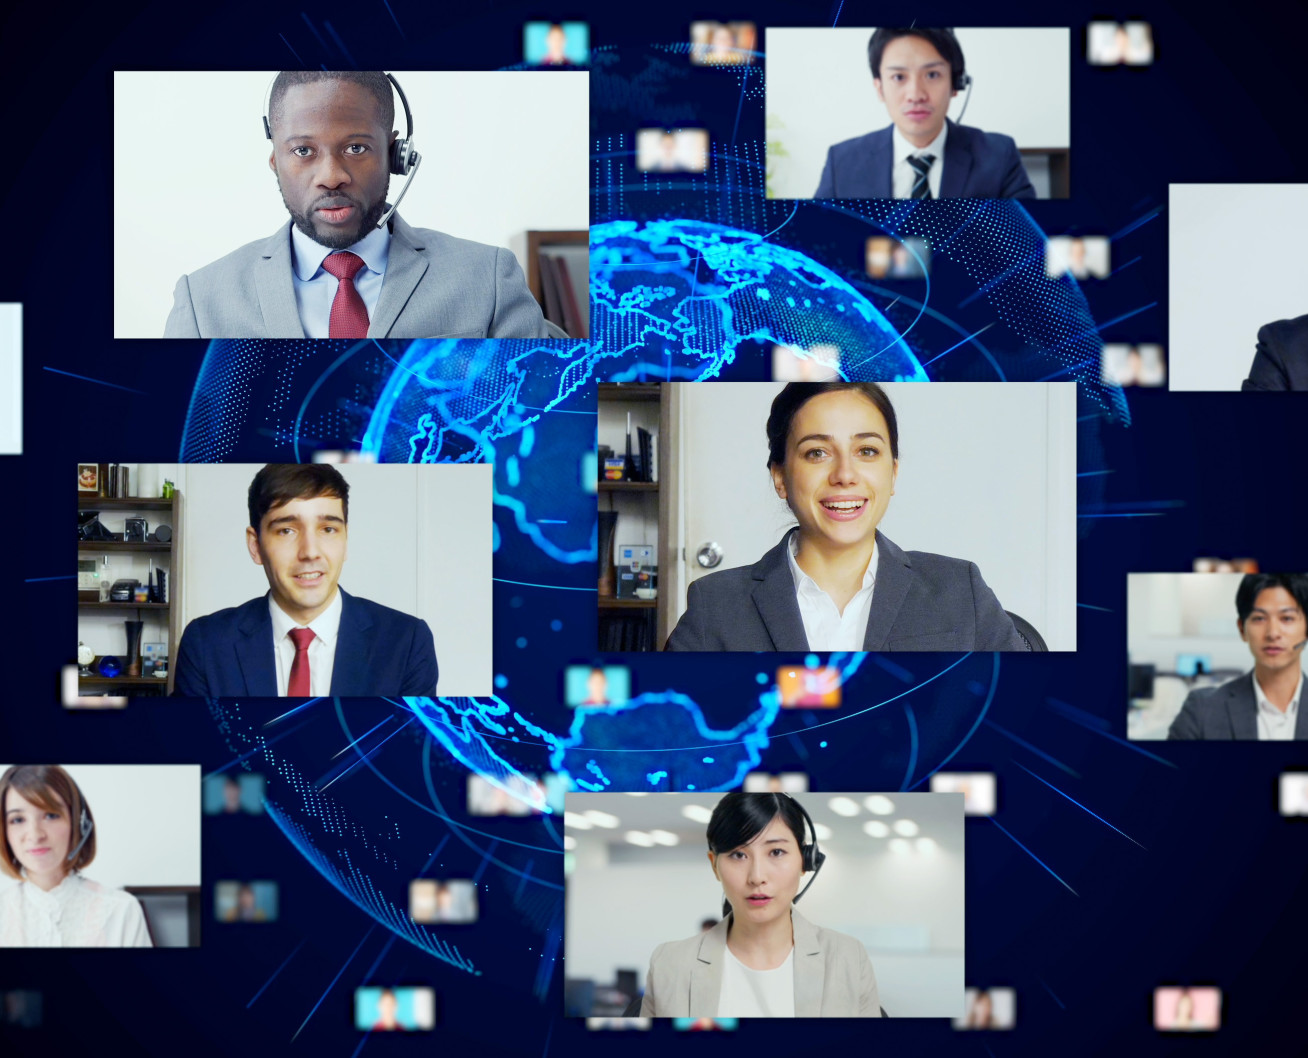 Video meeting depicting many different faces on a screen